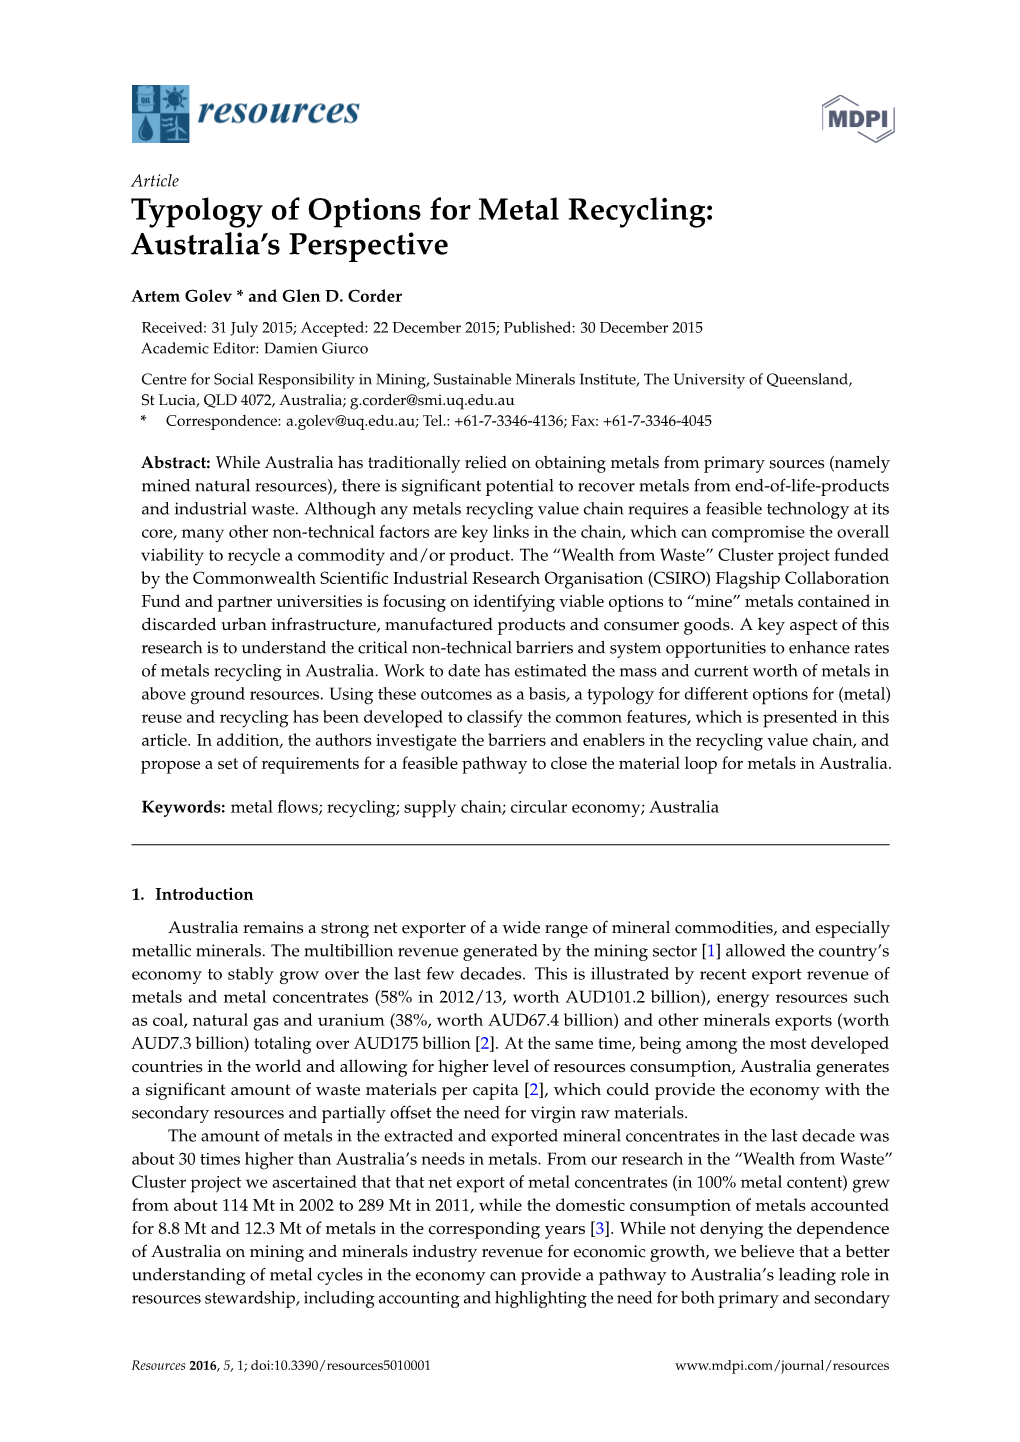 Typology of Options for Metal Recycling: Australia’S Perspective